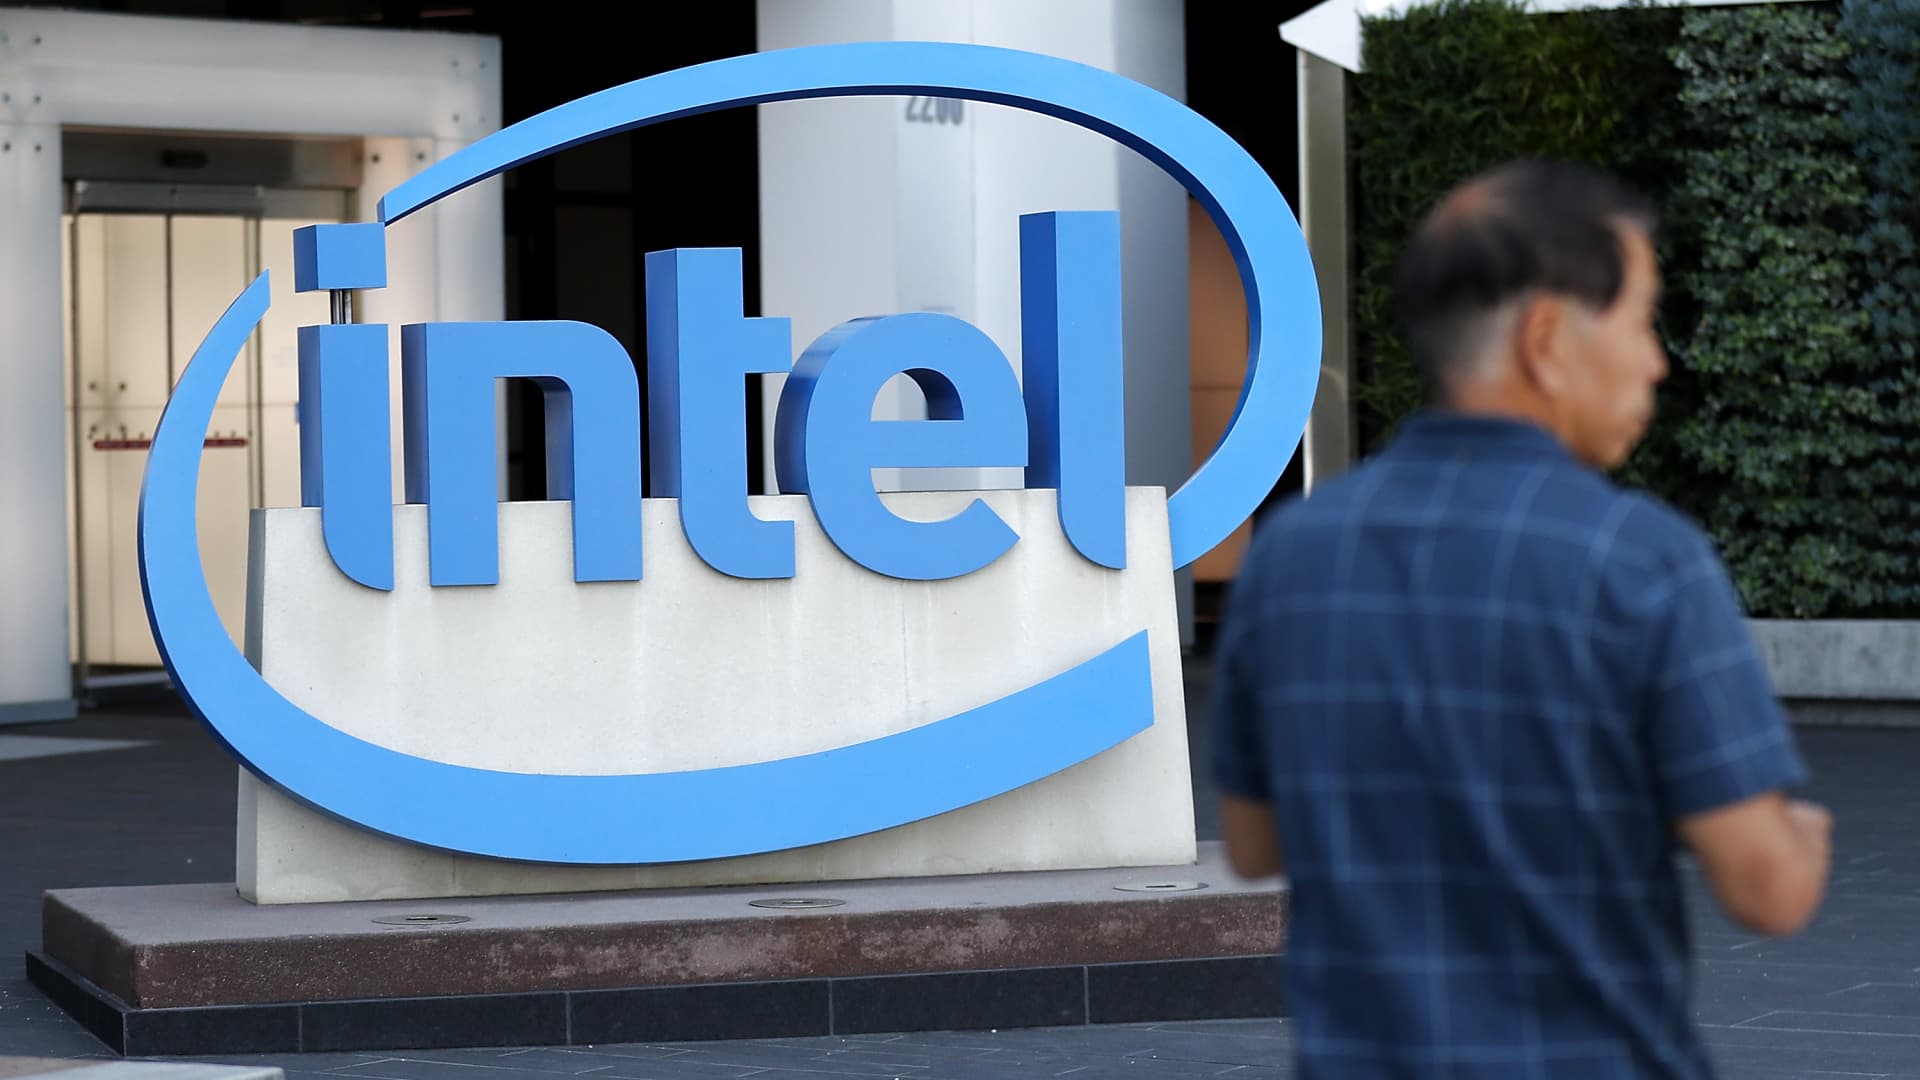 The Intel logo is displayed outside of the Intel headquarters in Santa Clara, Calif.